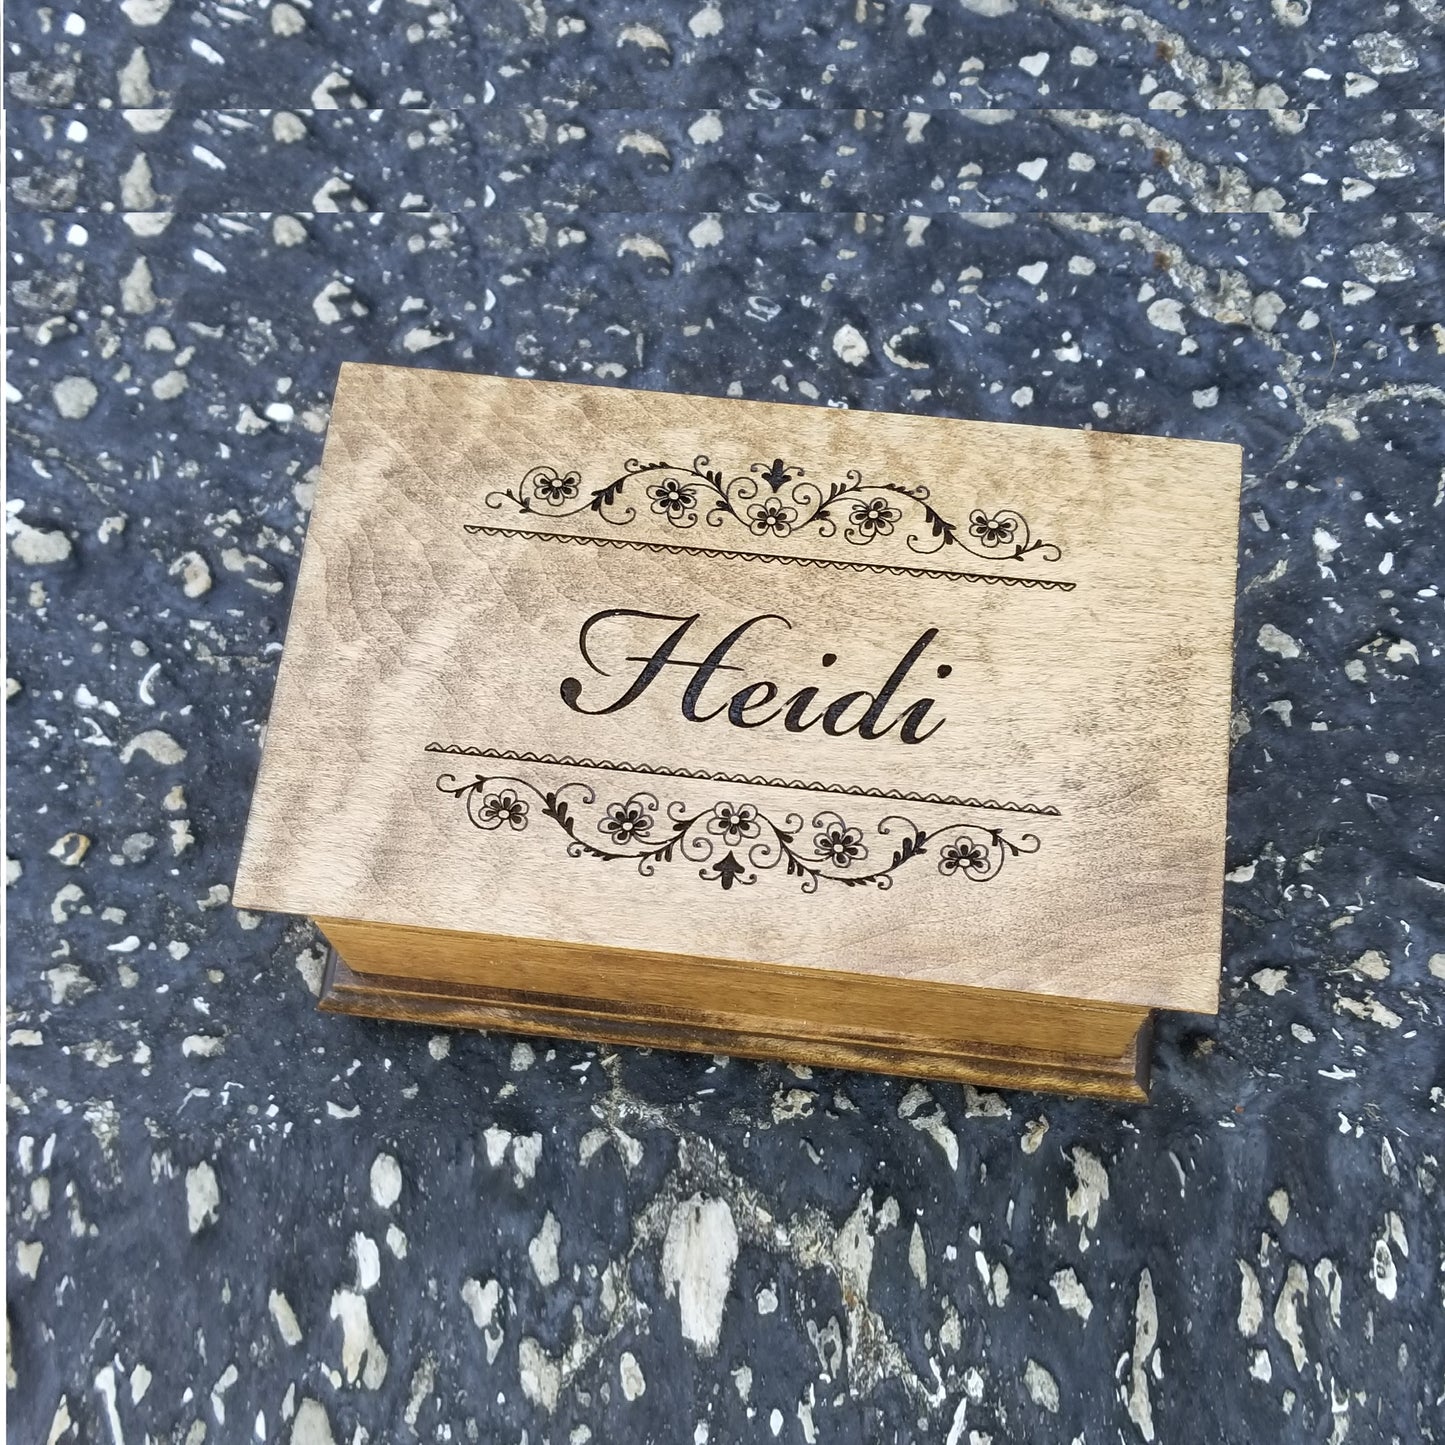 Name engraved jewelry box with floral borders on top with built in music player